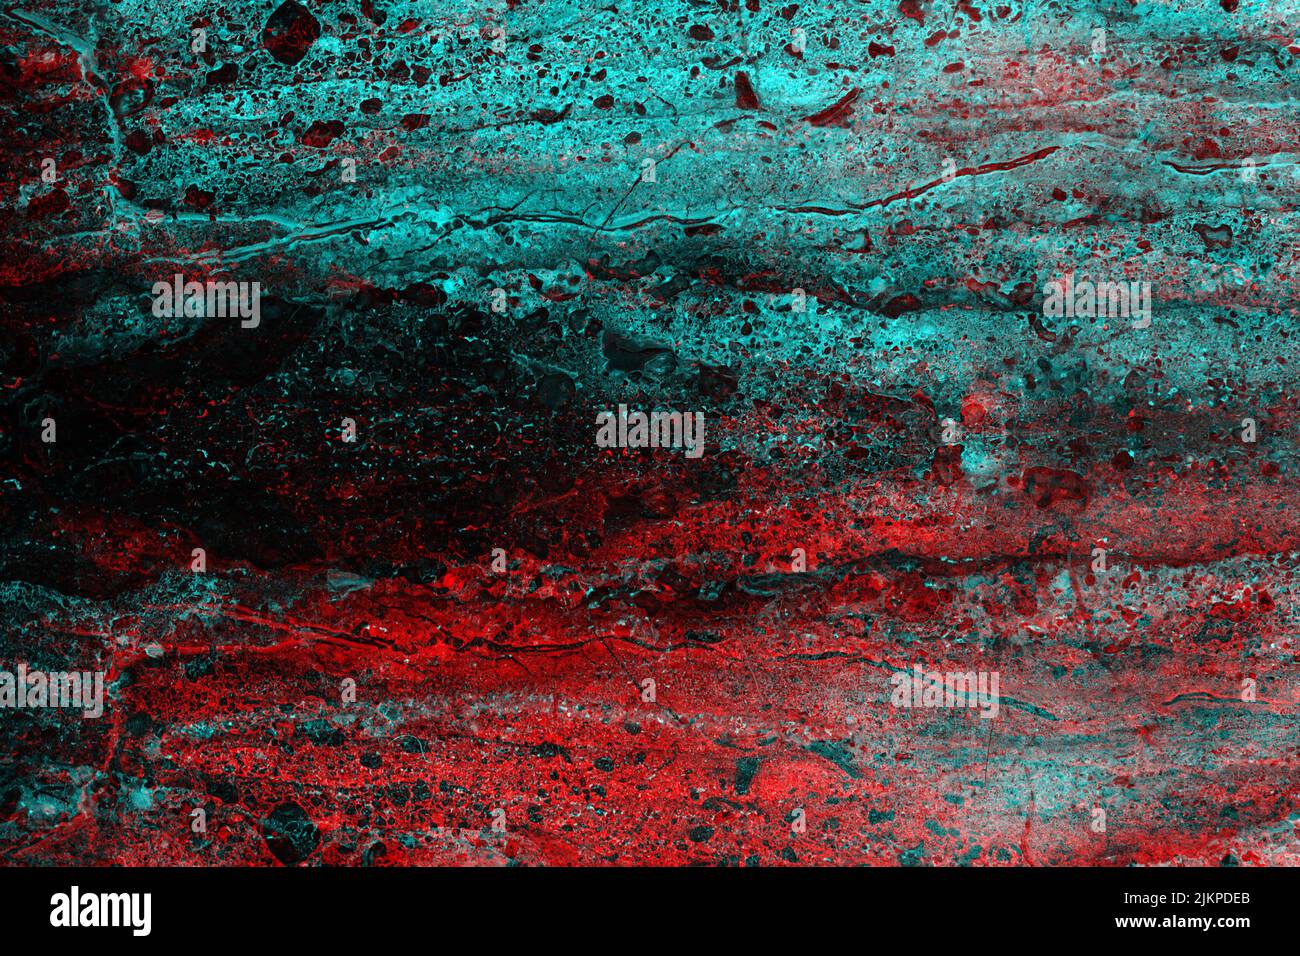 Abstract marble texture with red and blue veins. Background photo, front view Stock Photo